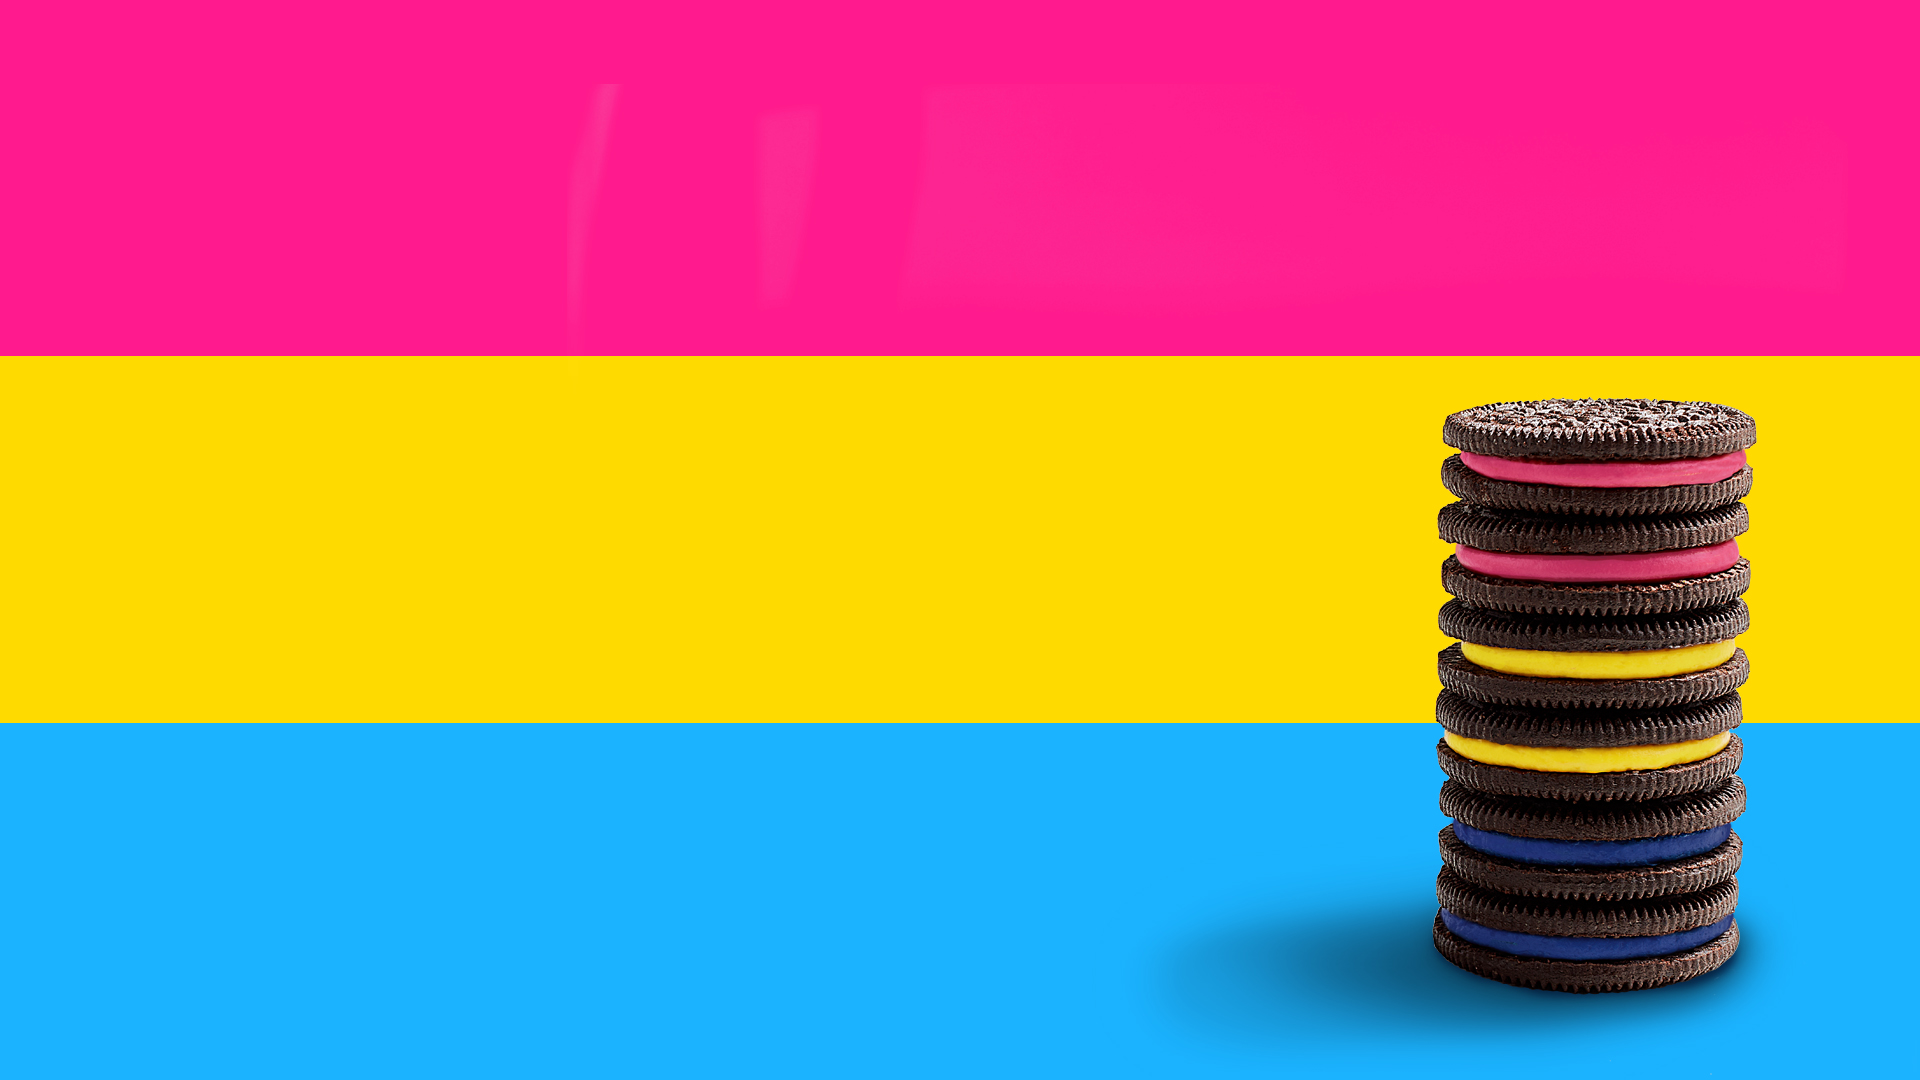 OREO Cookie Pansexual pride flag consists of three horizontal stripes: one pink, one yellow, and one light blue